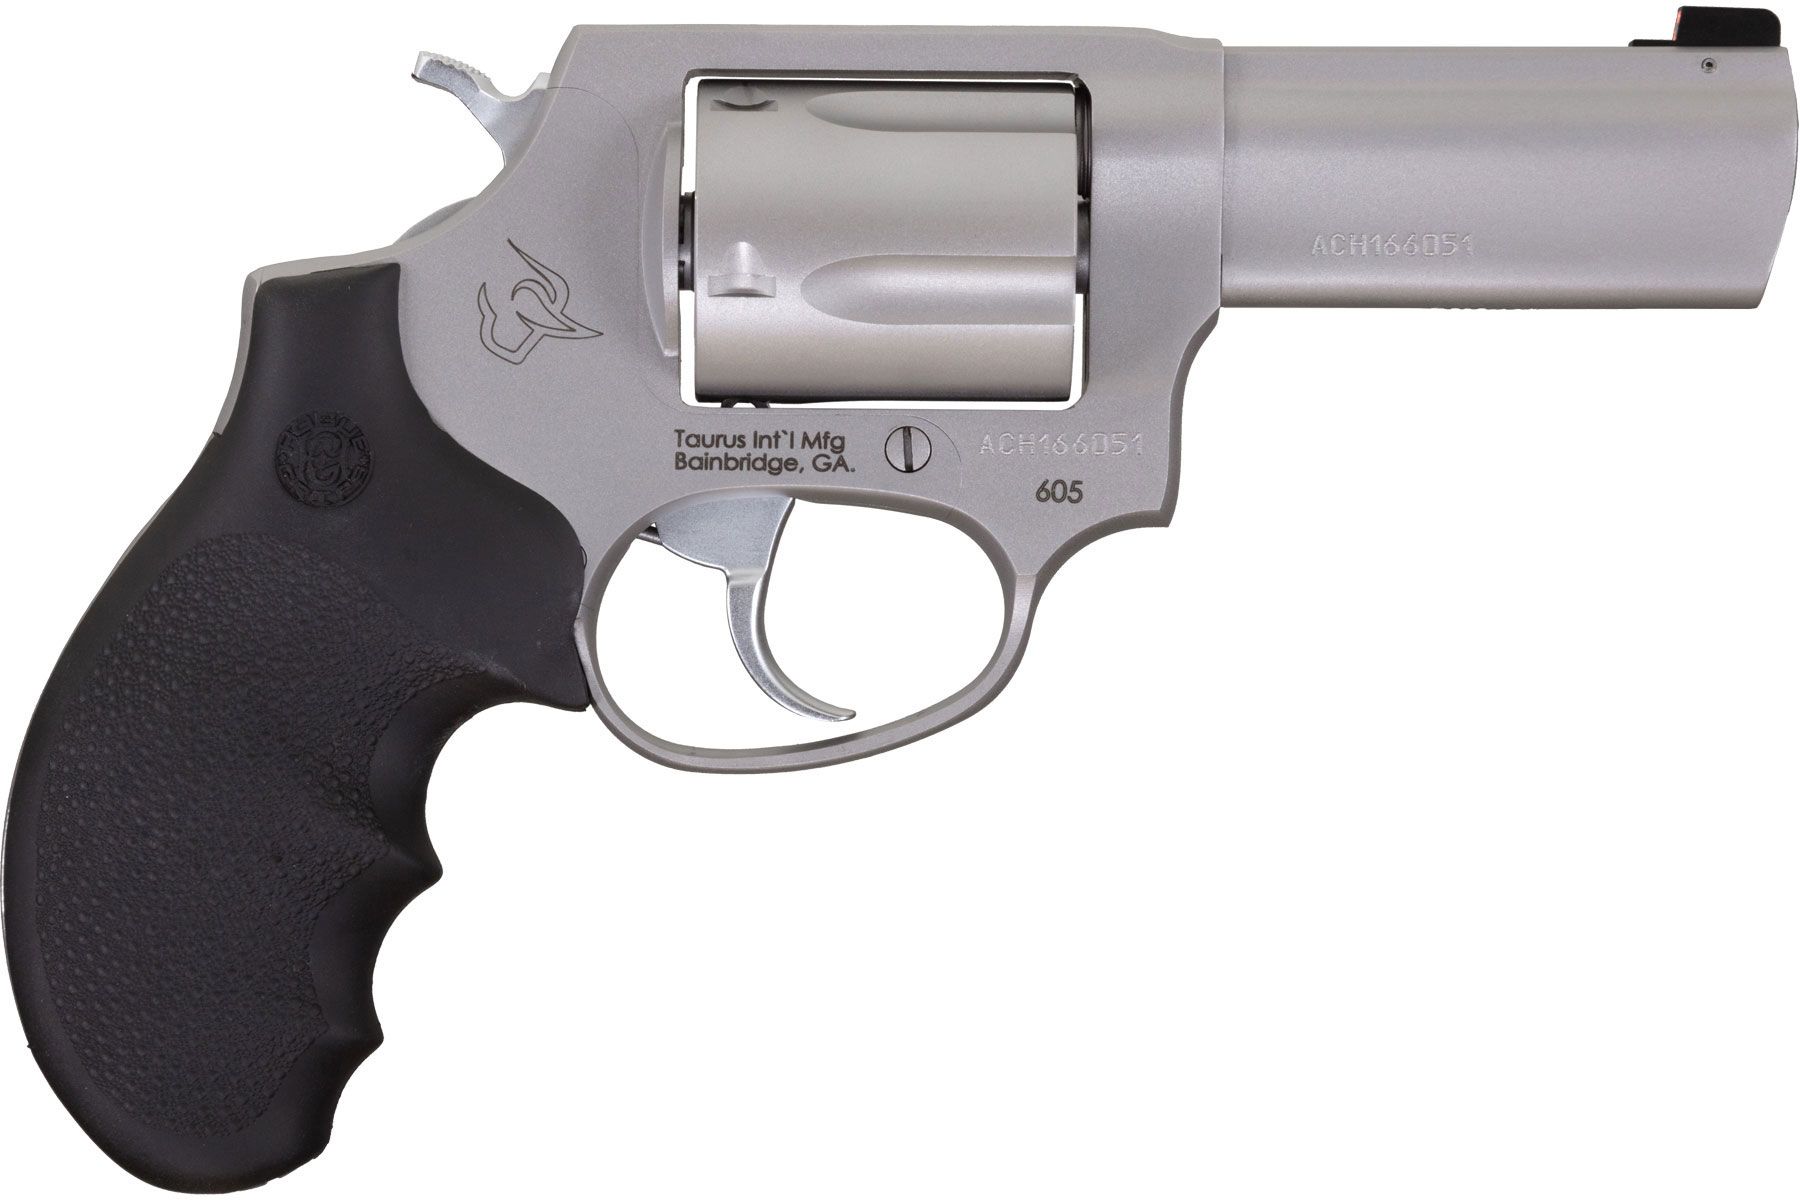 Taurus Small Frame Revolvers - Ideal Concealed Carry